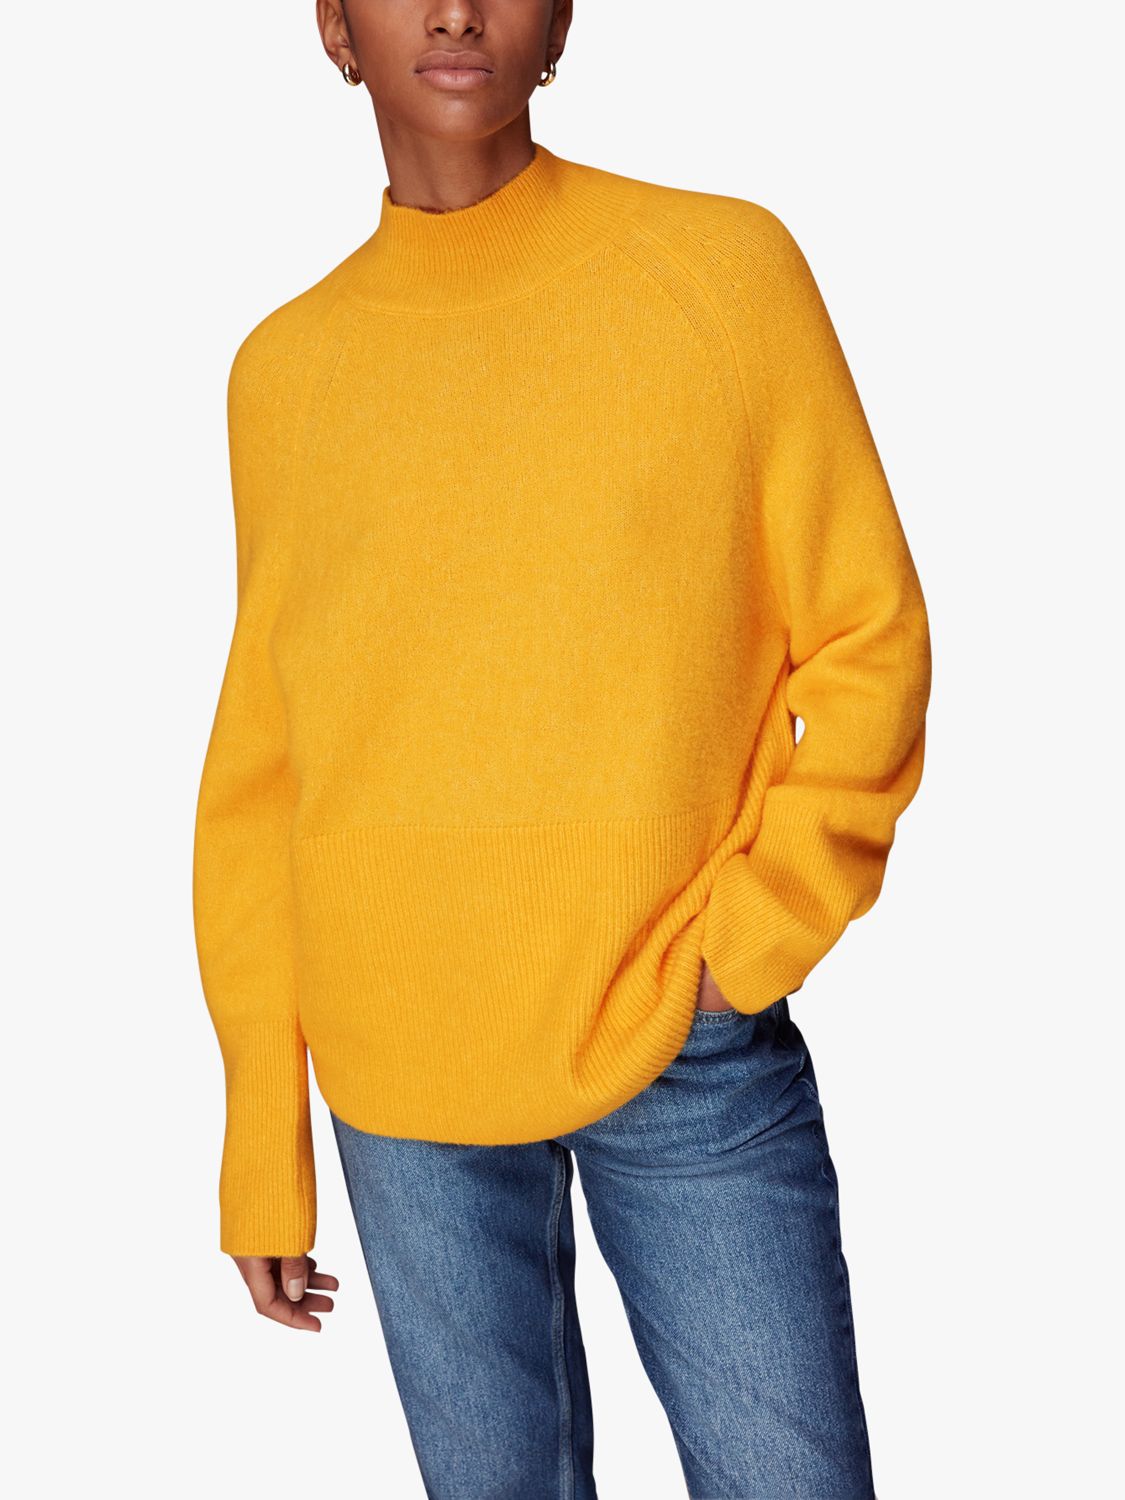 Whistles Oversize Funnel Neck Wool Blend Jumper, Yellow, XL